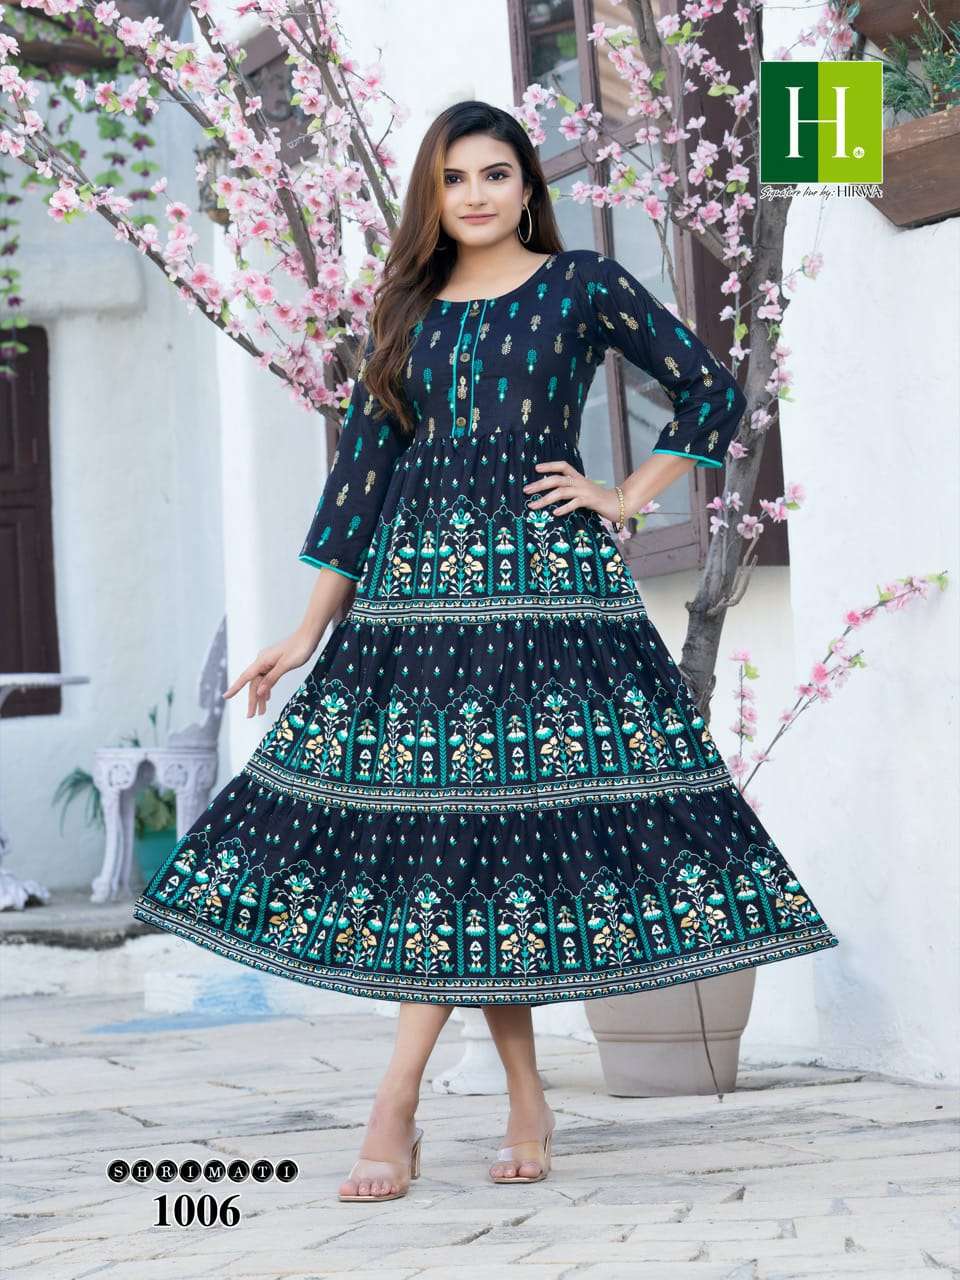 Trendy Beauty Queen Madhuri Vol 1 Letest Style Flair Short Kurti New  Collection